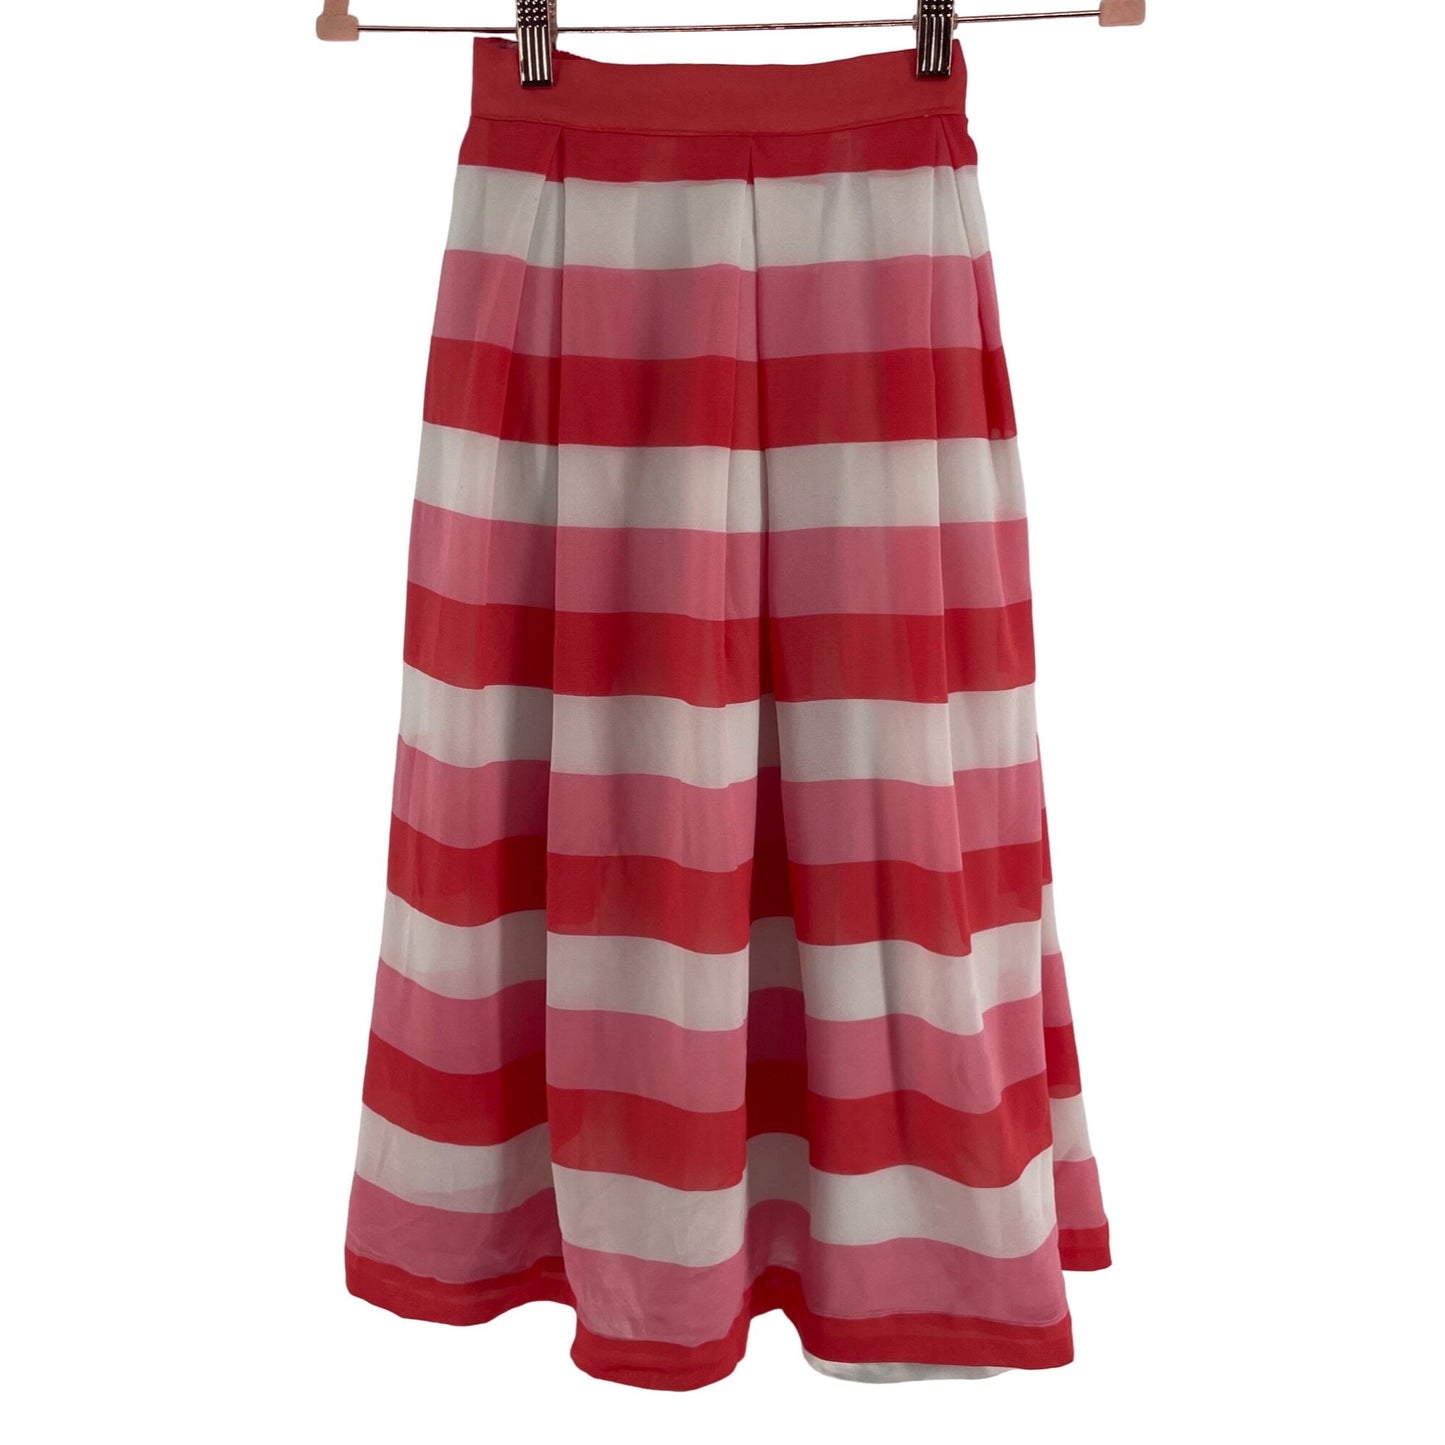 Girl's Size 3/4 Pink/White Striped A-Line Max Skirt